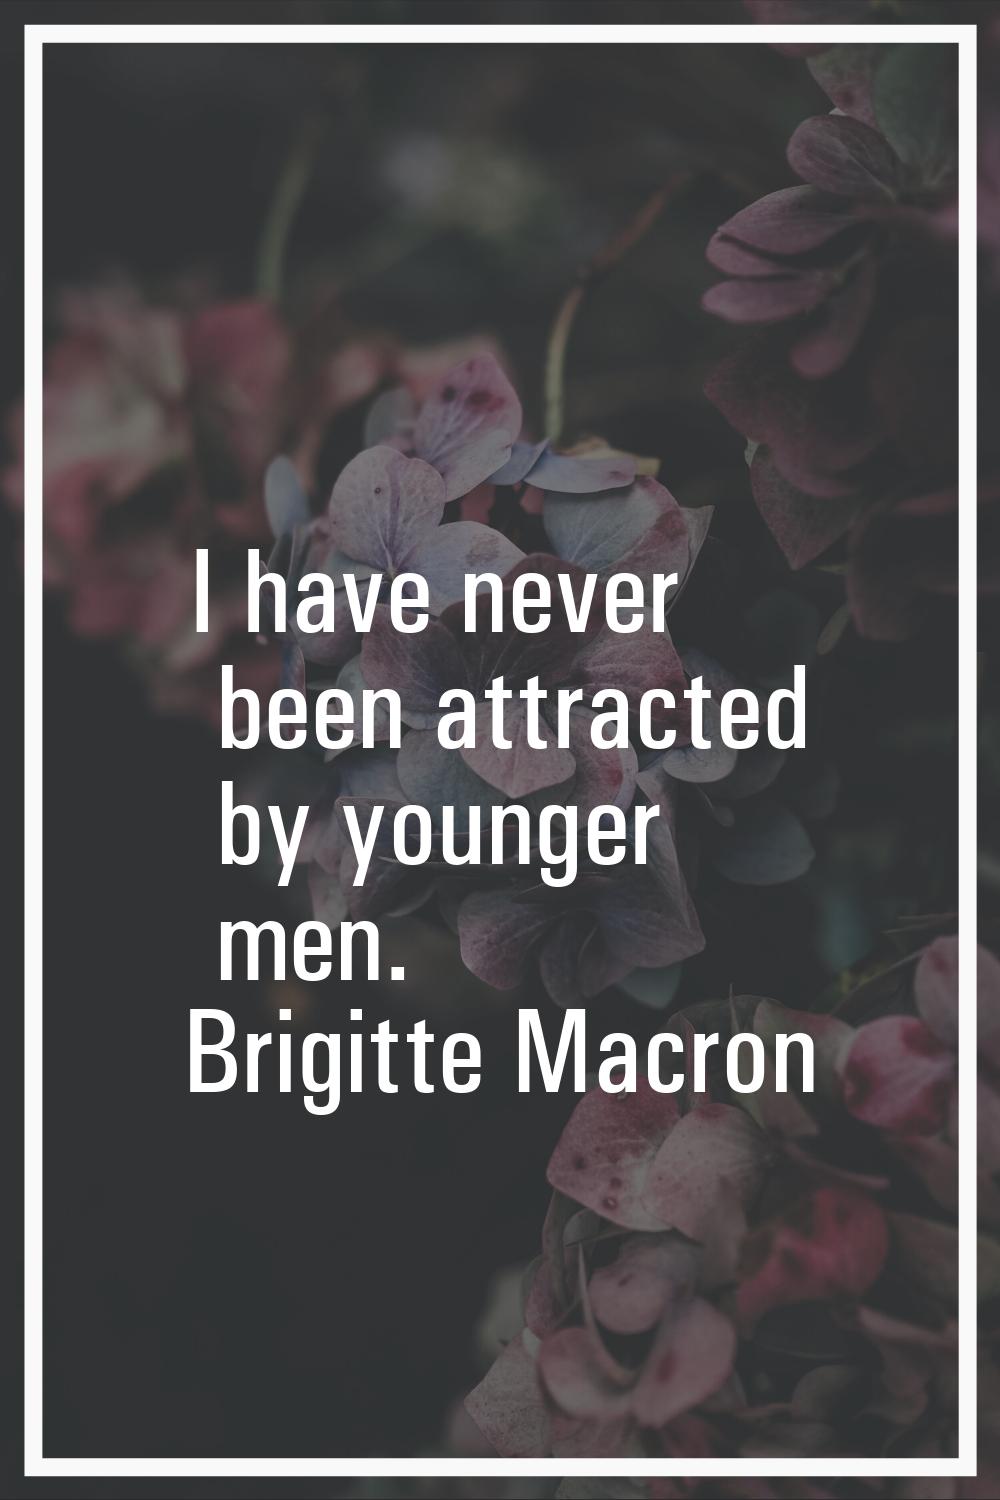 I have never been attracted by younger men.